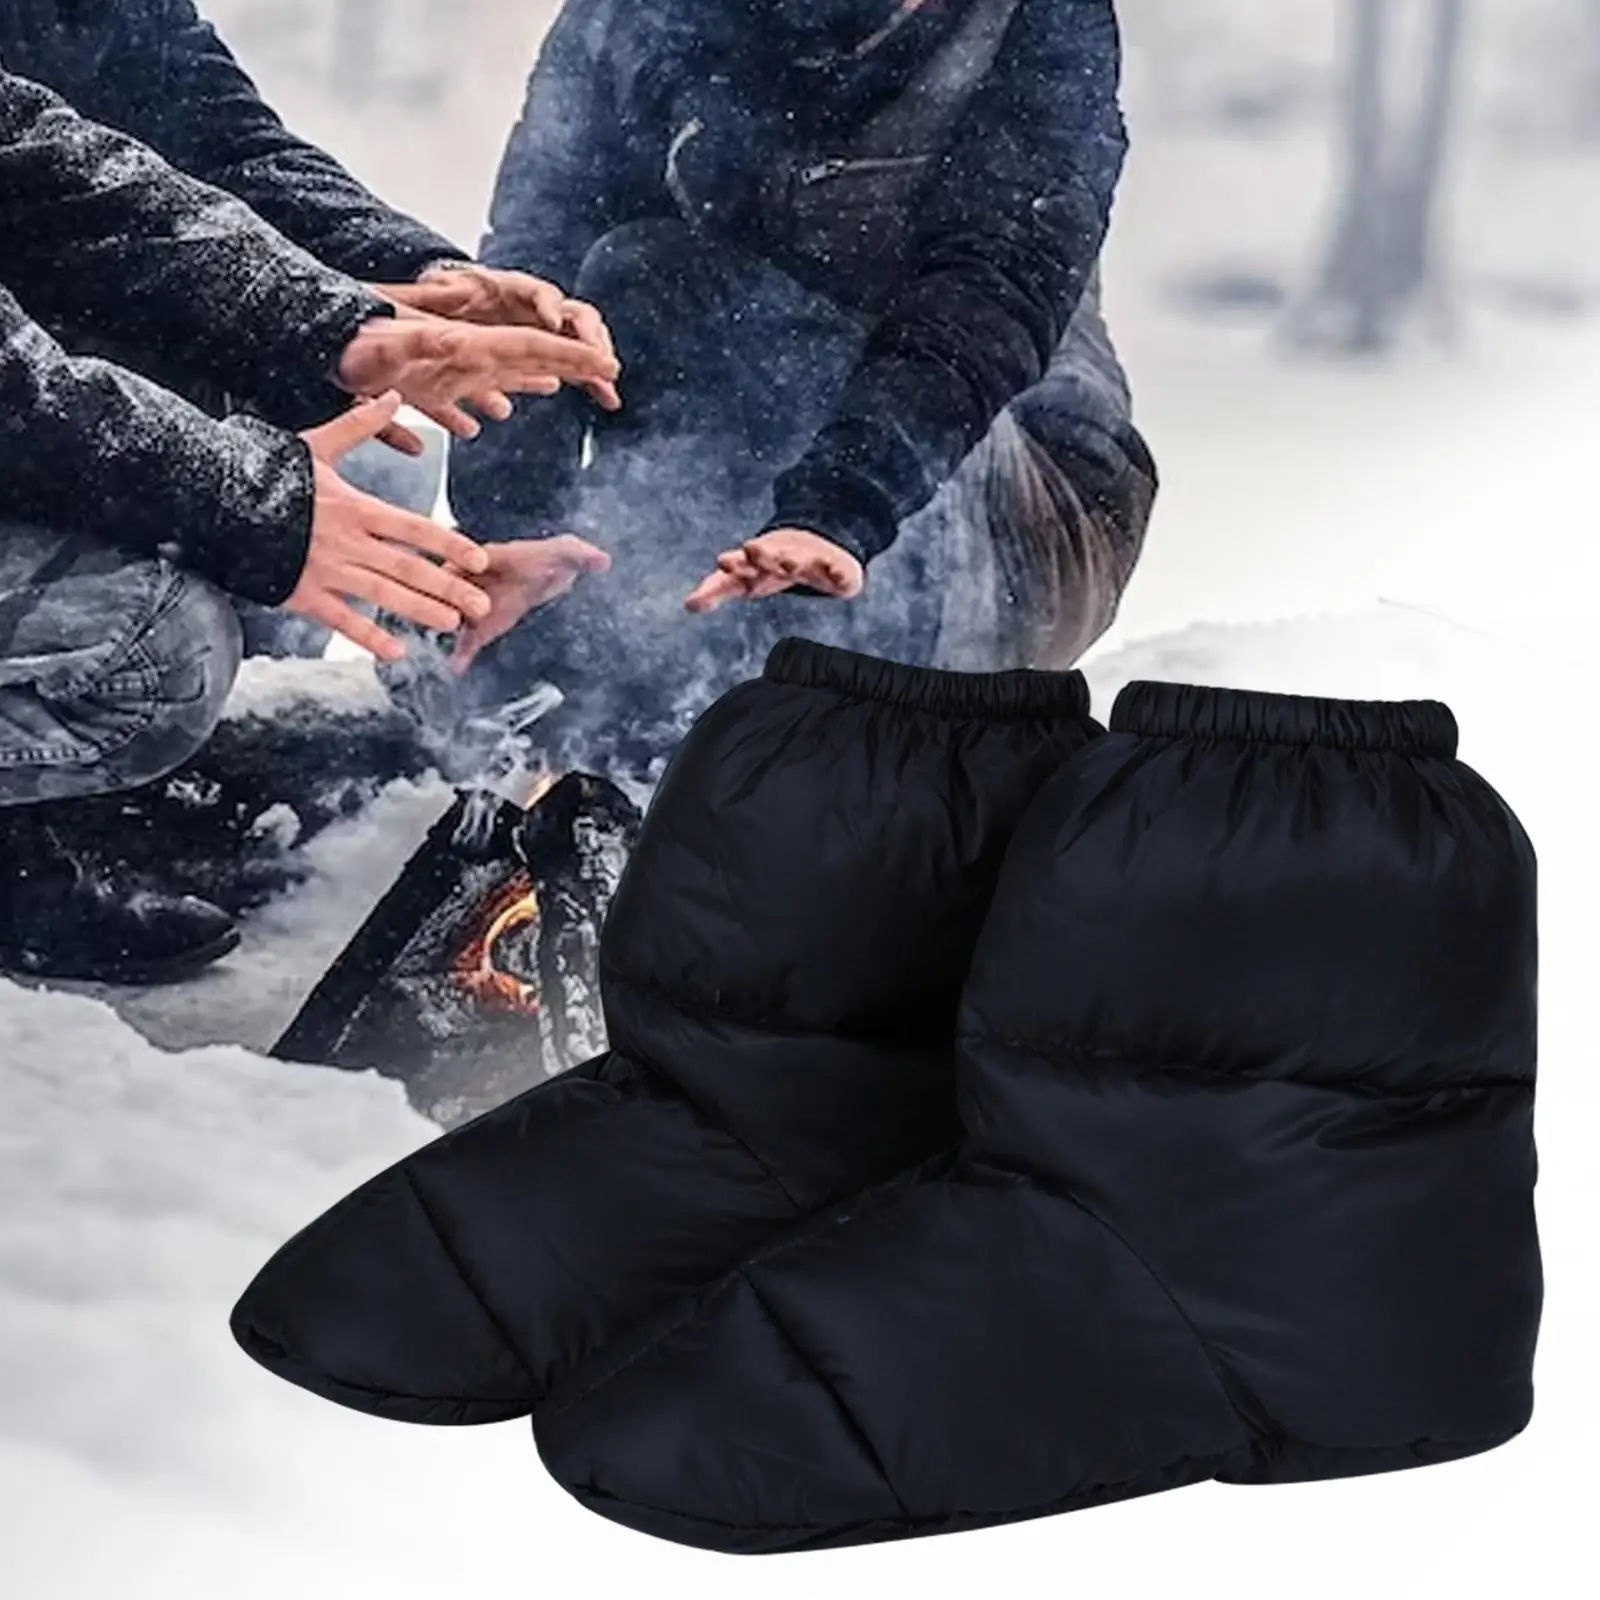 Winter Down Slippers Bootie Shoes Women Men Waterproof Lightweight Feet Cover Socks for Backpacking Indoor Office Fishing Hiking